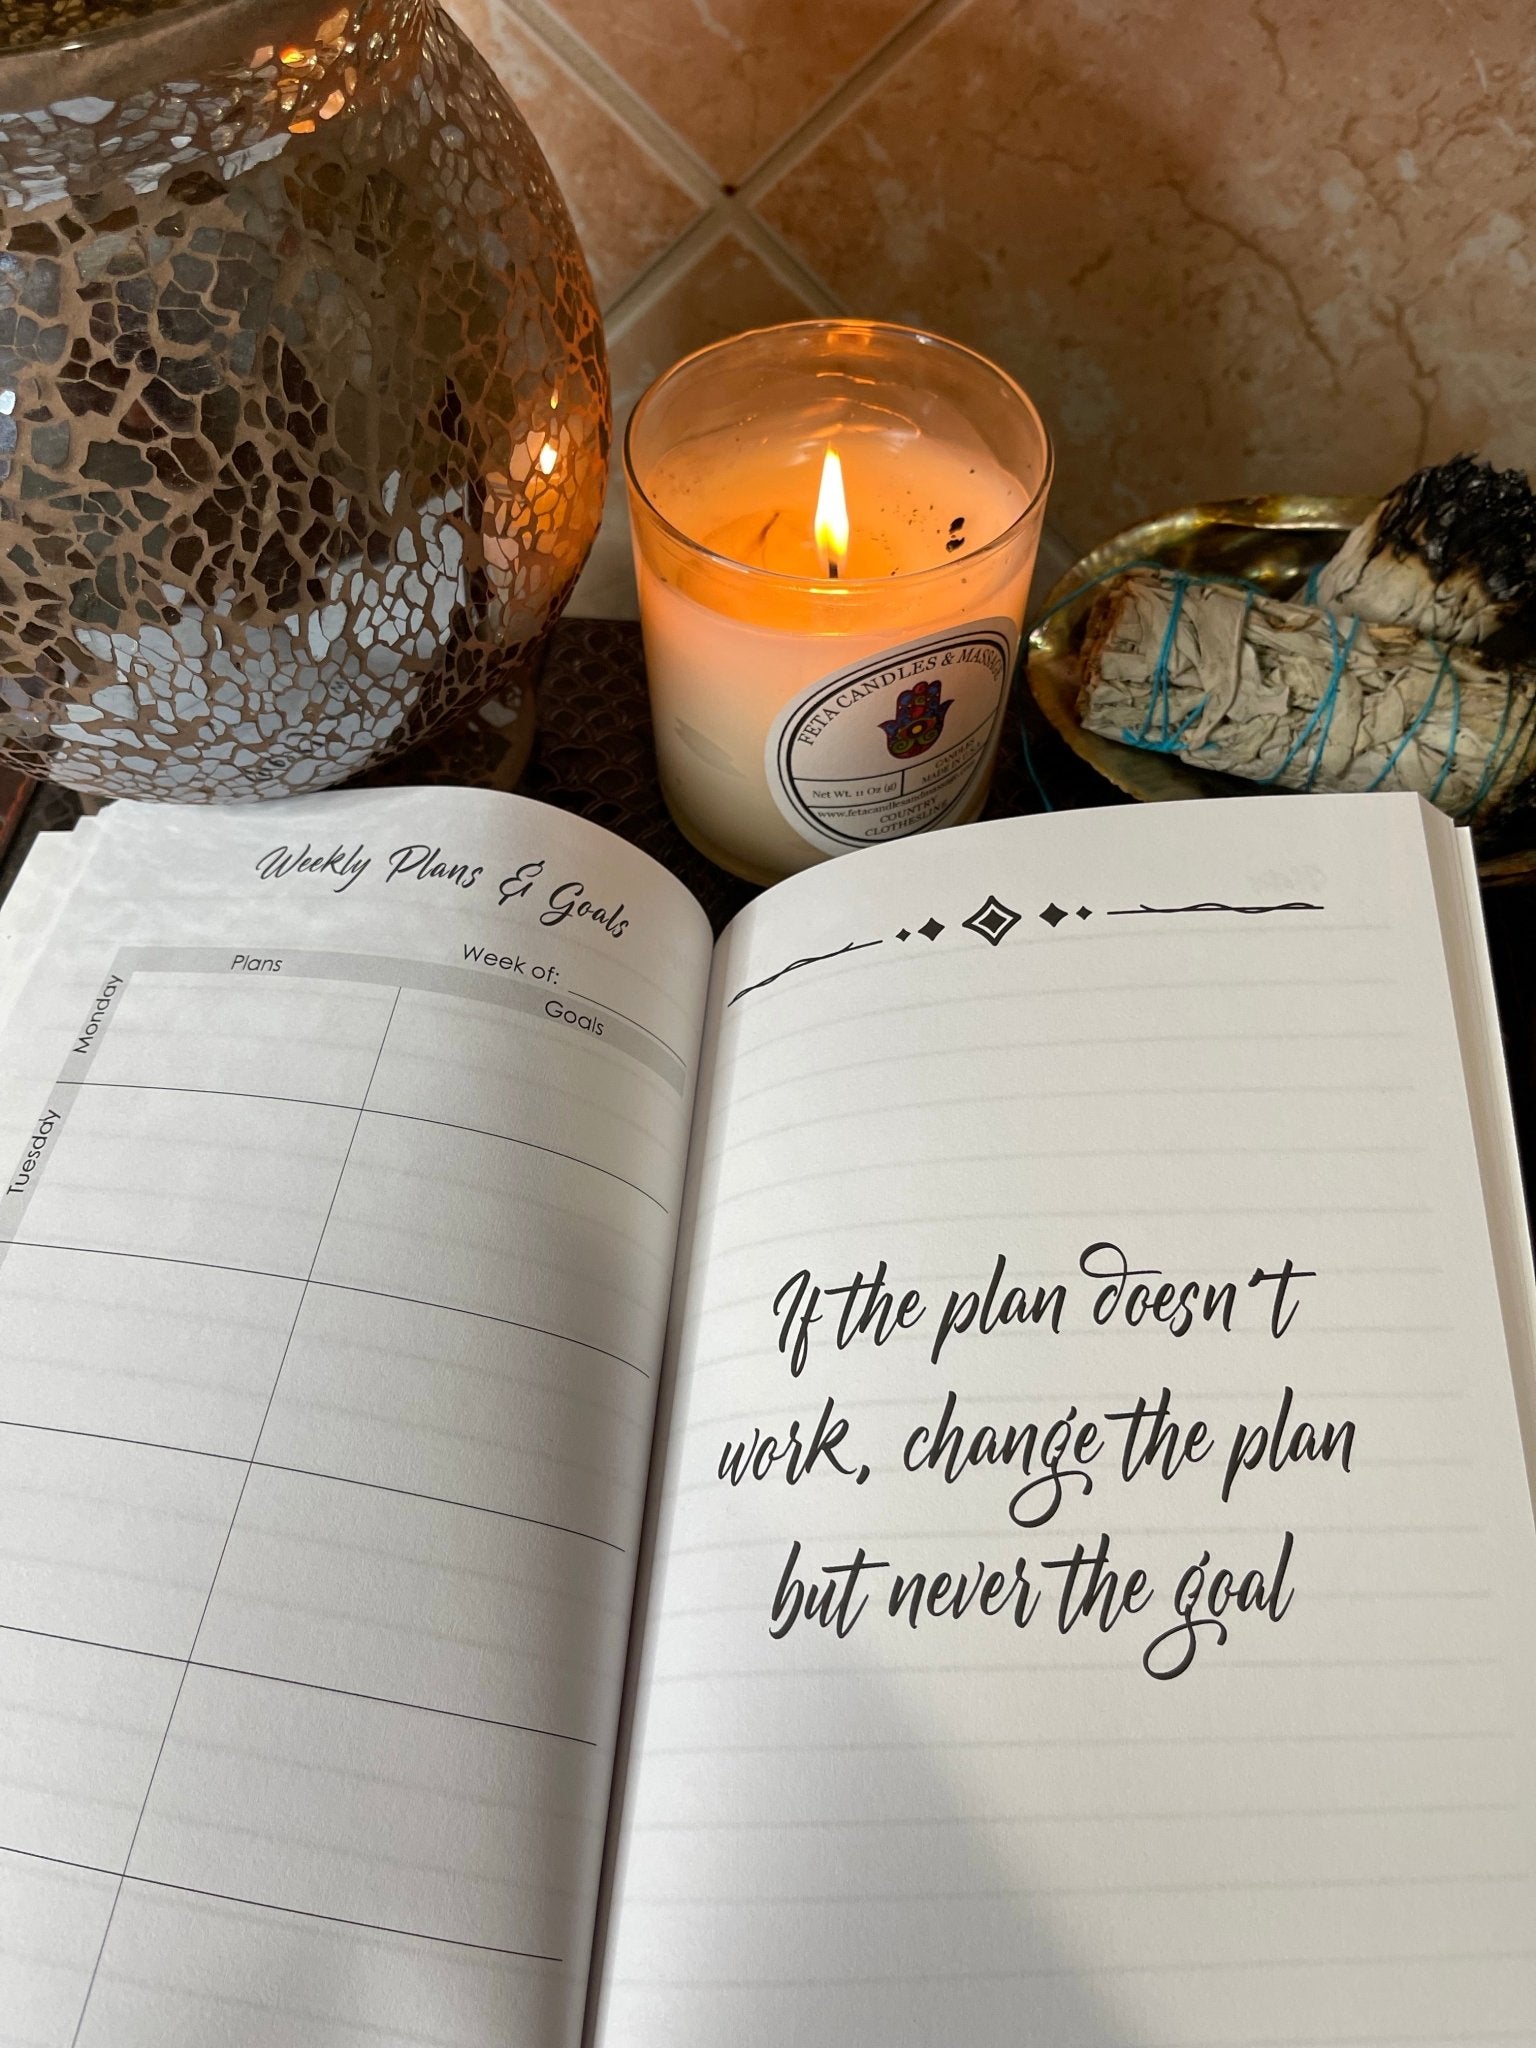 Success Starts With a Plan Guided Journal & Mug Gift Set - Shawnti Refuge Journals